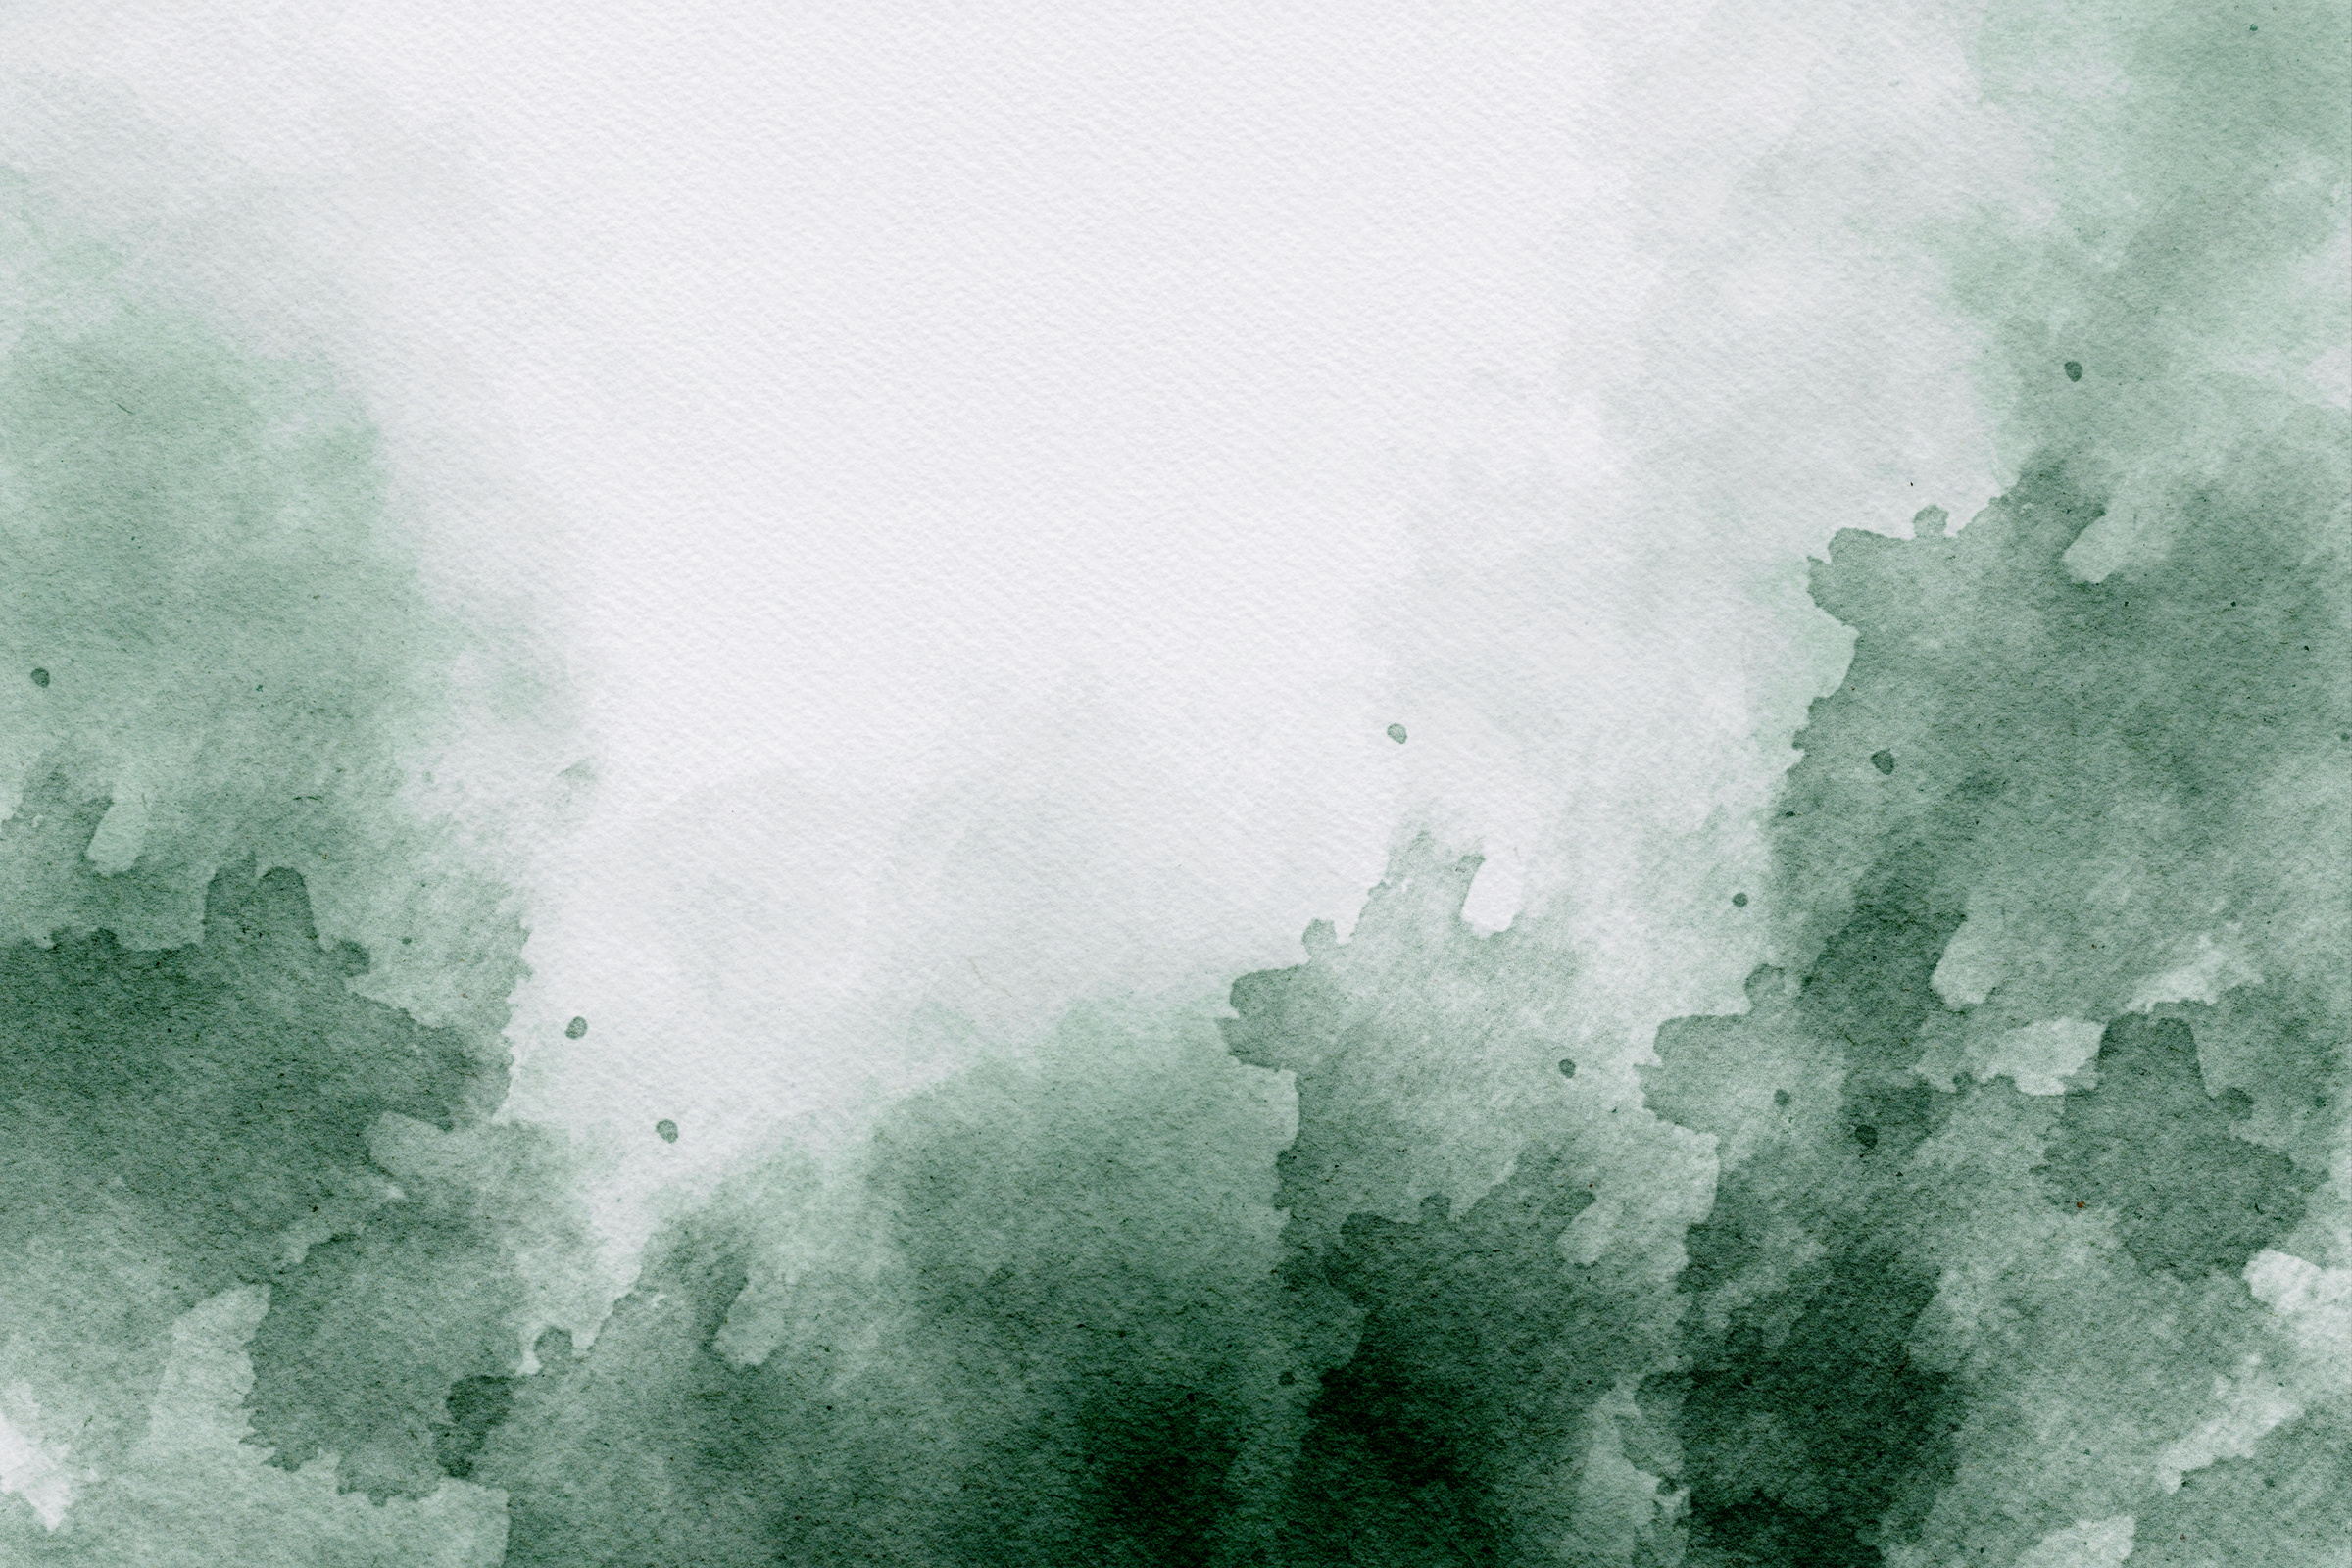 Green Watercolor Background